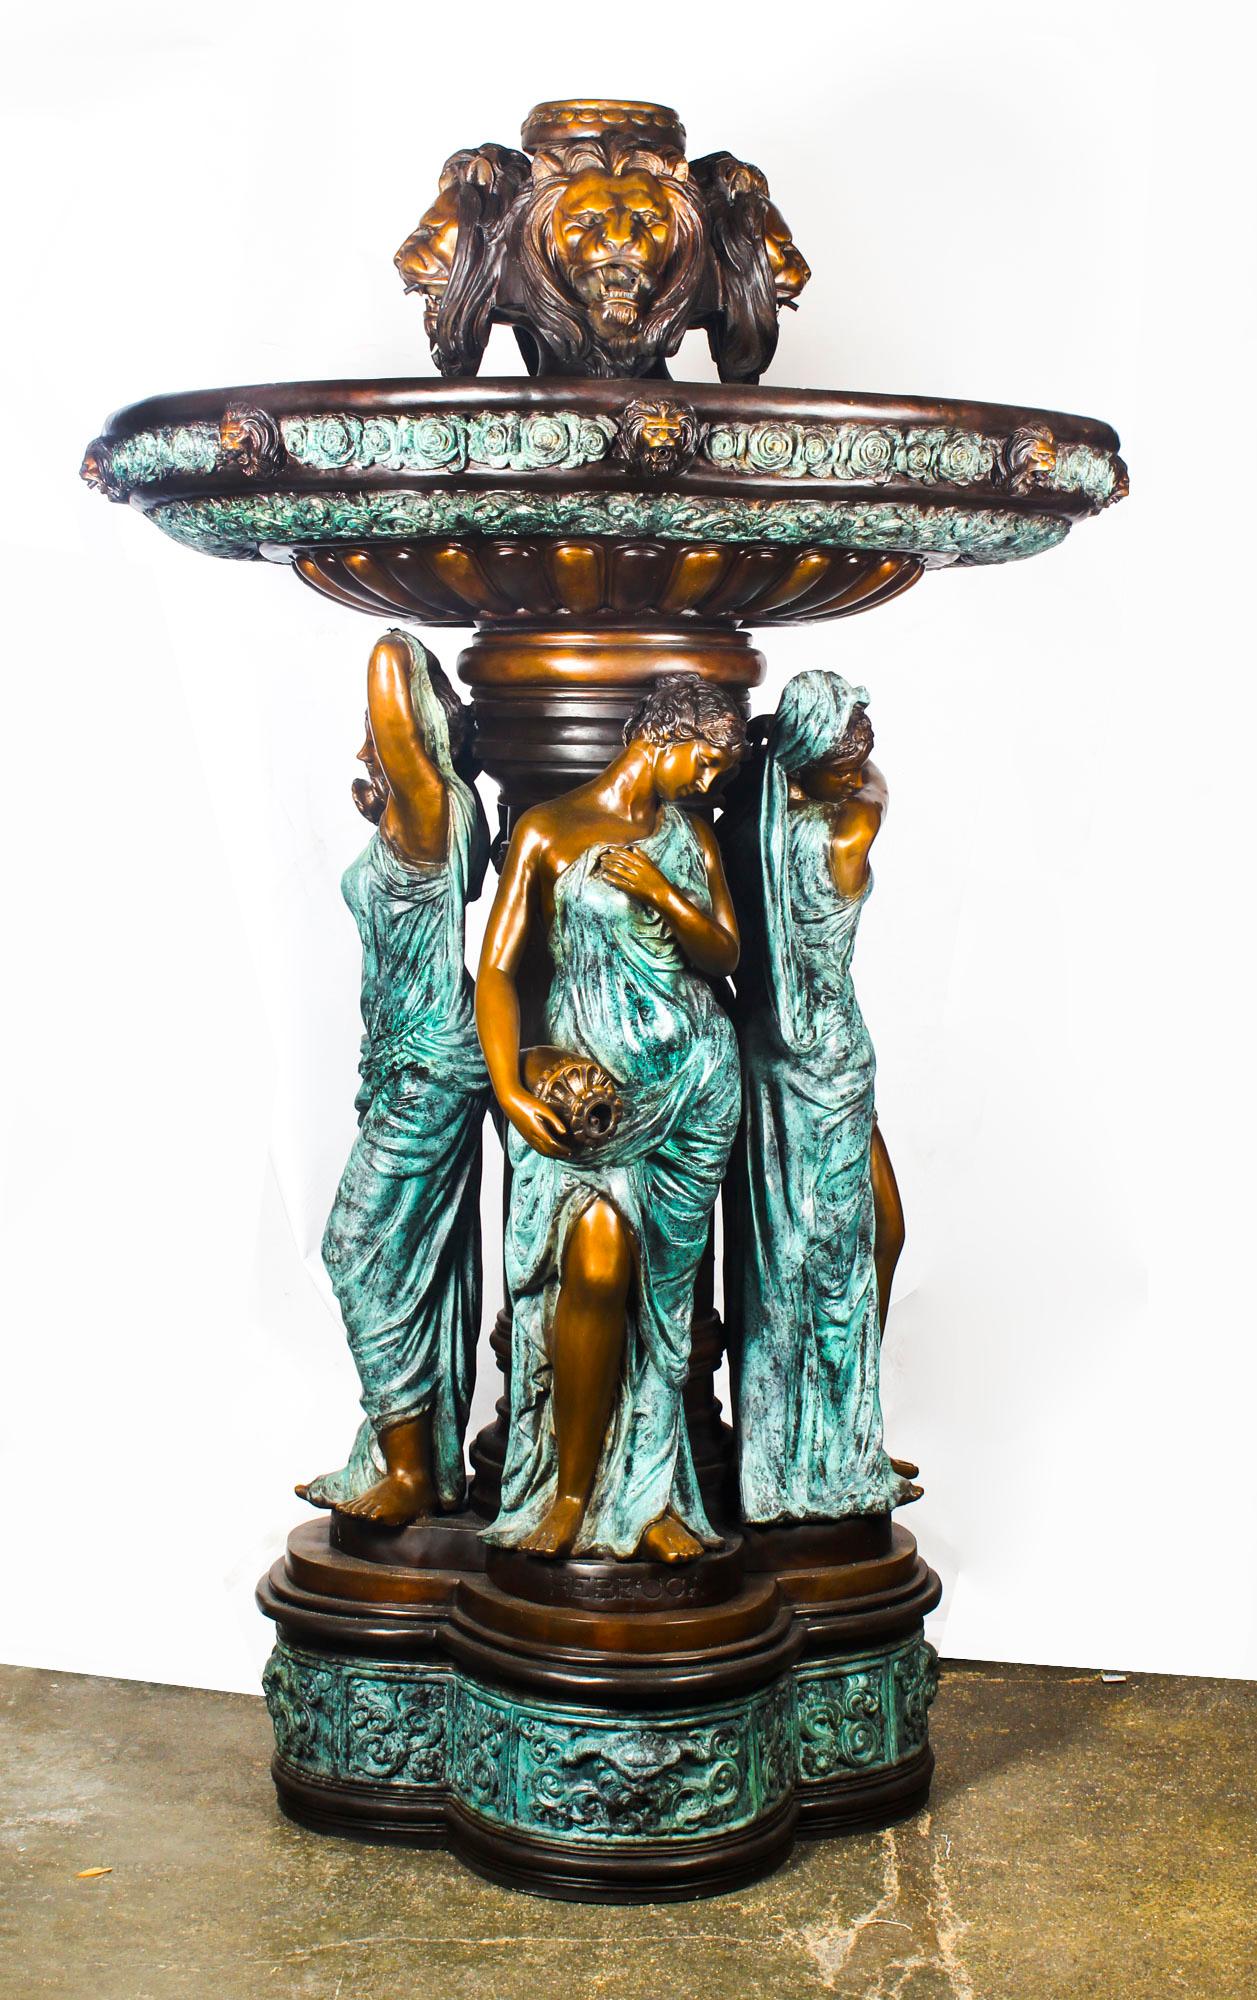 Vintage Monumental Neo-Classical Revival Bronze Sculptural Pond Fountain 20th C For Sale 3